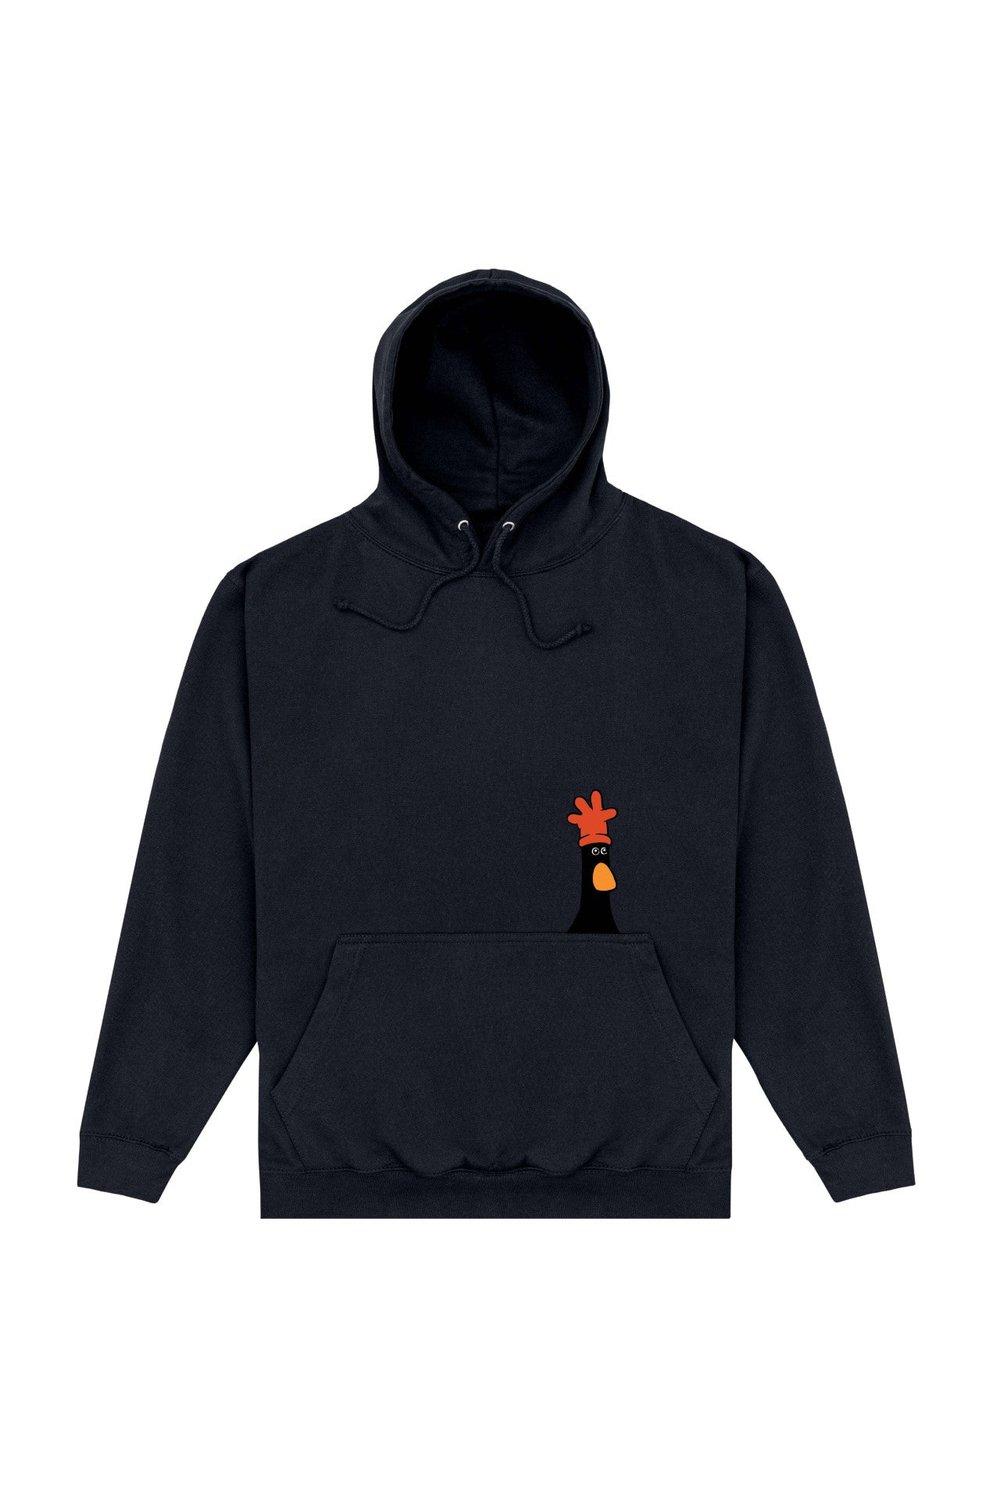 Feathers McGraw Hoodie Long Sleeve OTH